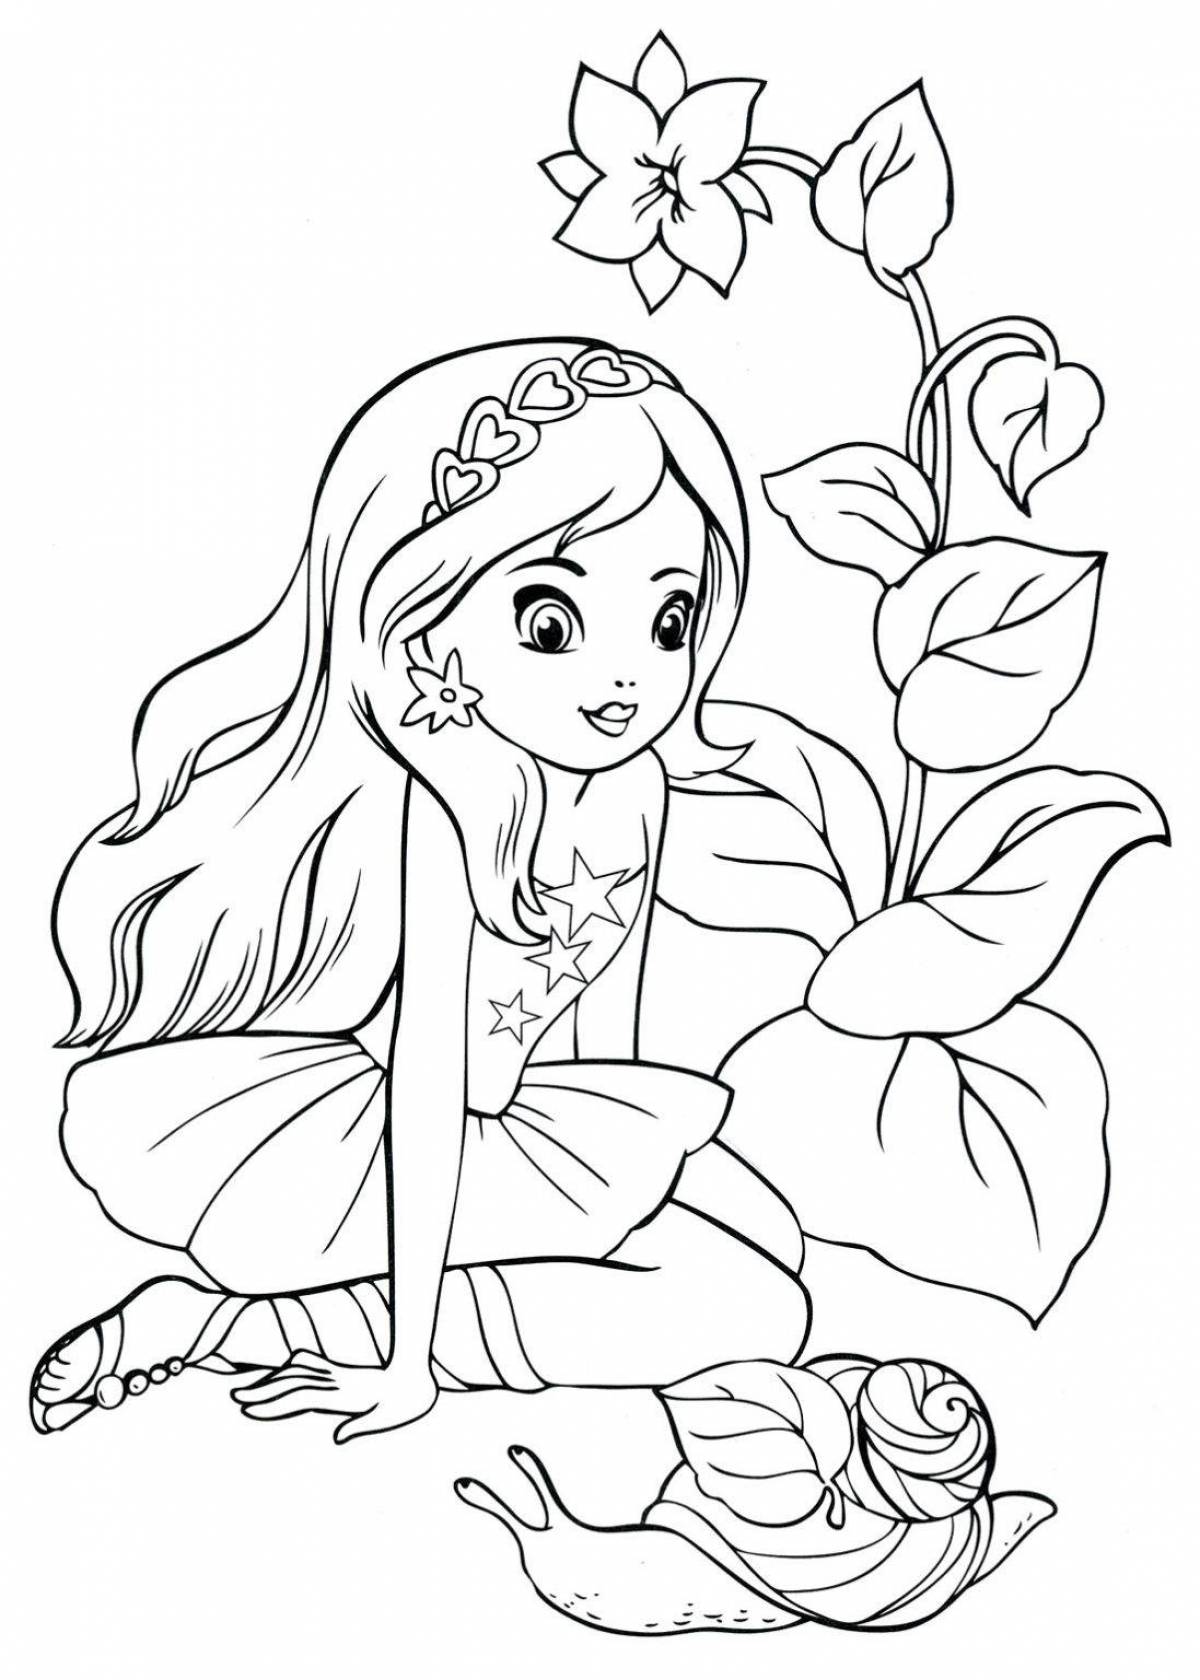 Colourful coloring for girls 5-6 years old